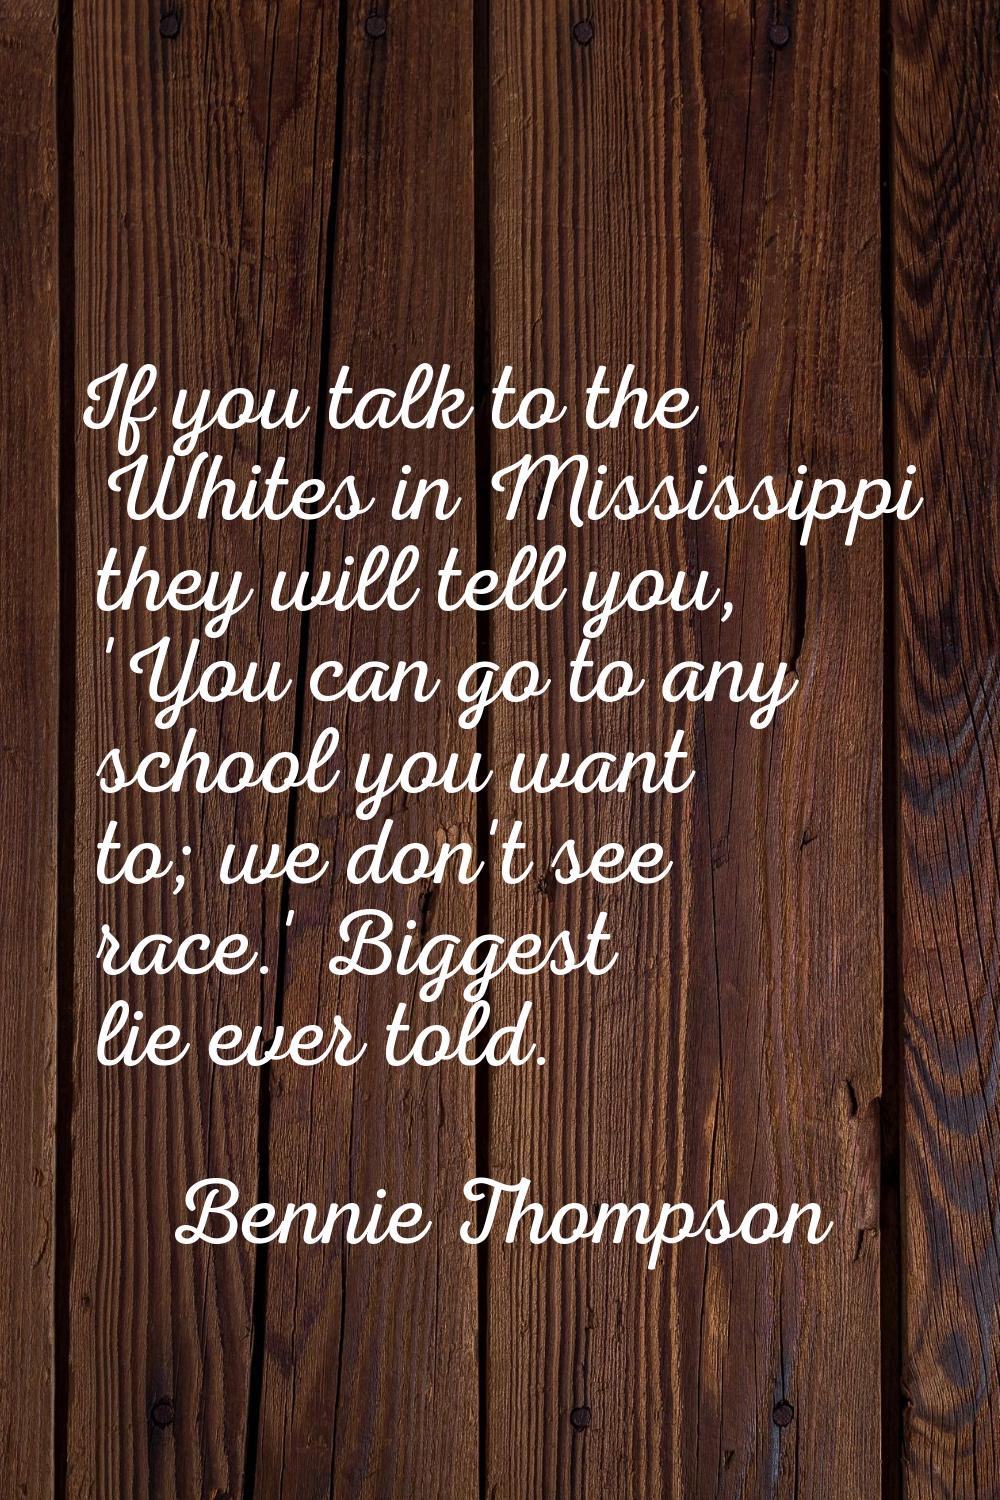 If you talk to the Whites in Mississippi they will tell you, 'You can go to any school you want to;